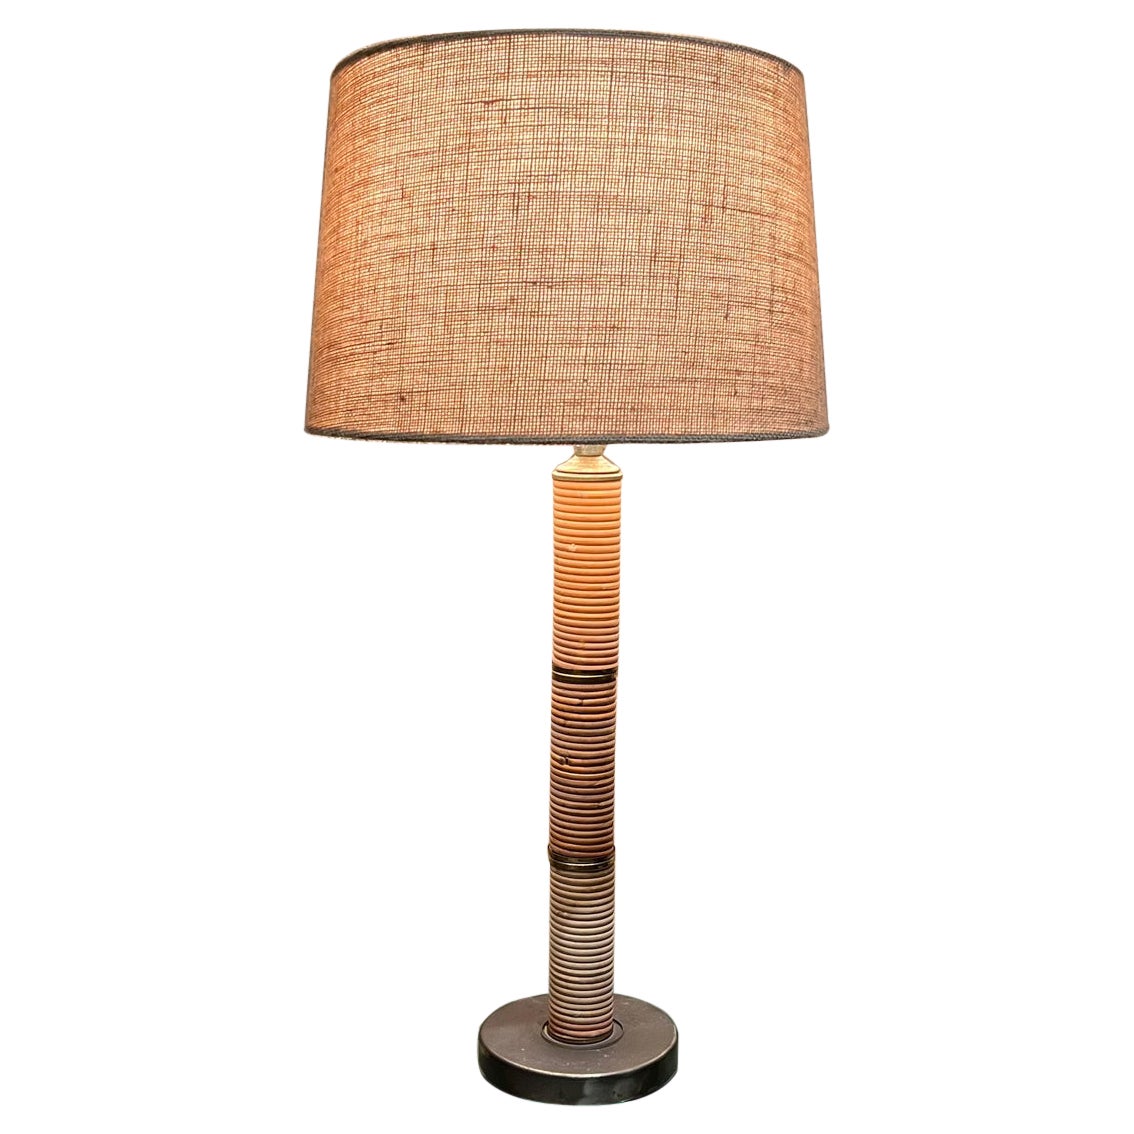 1960s Vintage Modern Wrapped Cane and Brass Plated Table Lamp